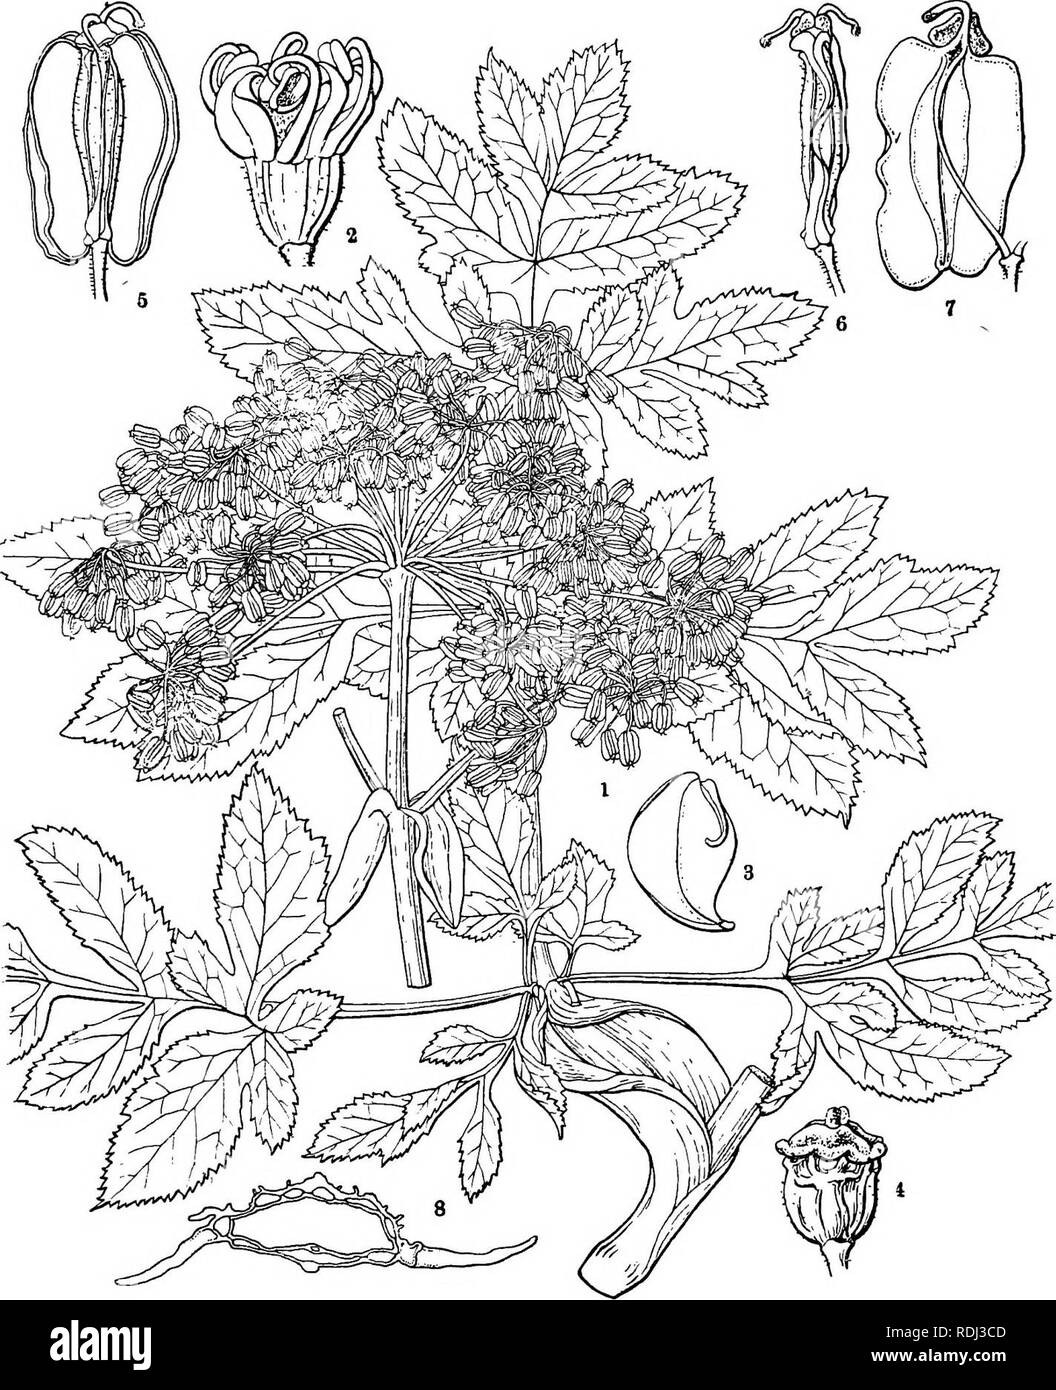 . Icones plantarum formosanarum nec non et contributiones ad floram formosanam; or, Icones of the plants of Formosa, and materials for a flora of the island, based on a study of the collections of the Botanical survey of the Government of Formosa. Botany. UMBELLIFEB^. 25. Fig. 14, Angelica formosana Bois.; 1, a bianoh x f; 2, a flower; 3, a petal; 4, a flower, petaJs taken off; 5, a fruit: 6, tlie same, seen from side; 7, a carpel, seen from -within; 8, section of a mature carpel.. Please note that these images are extracted from scanned page images that may have been digitally enhanced for re Stock Photo